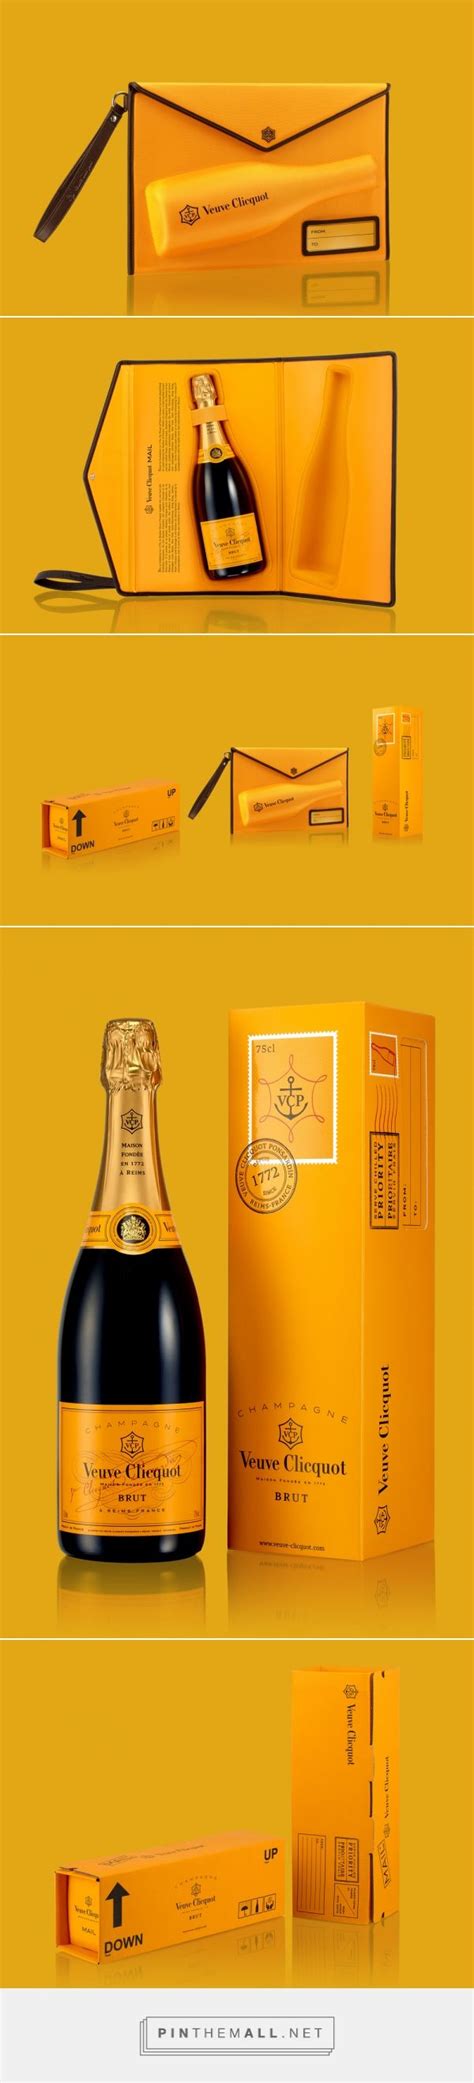 The Dieline Awards 2015 1st Place Wine Champagne Clicquot Mail